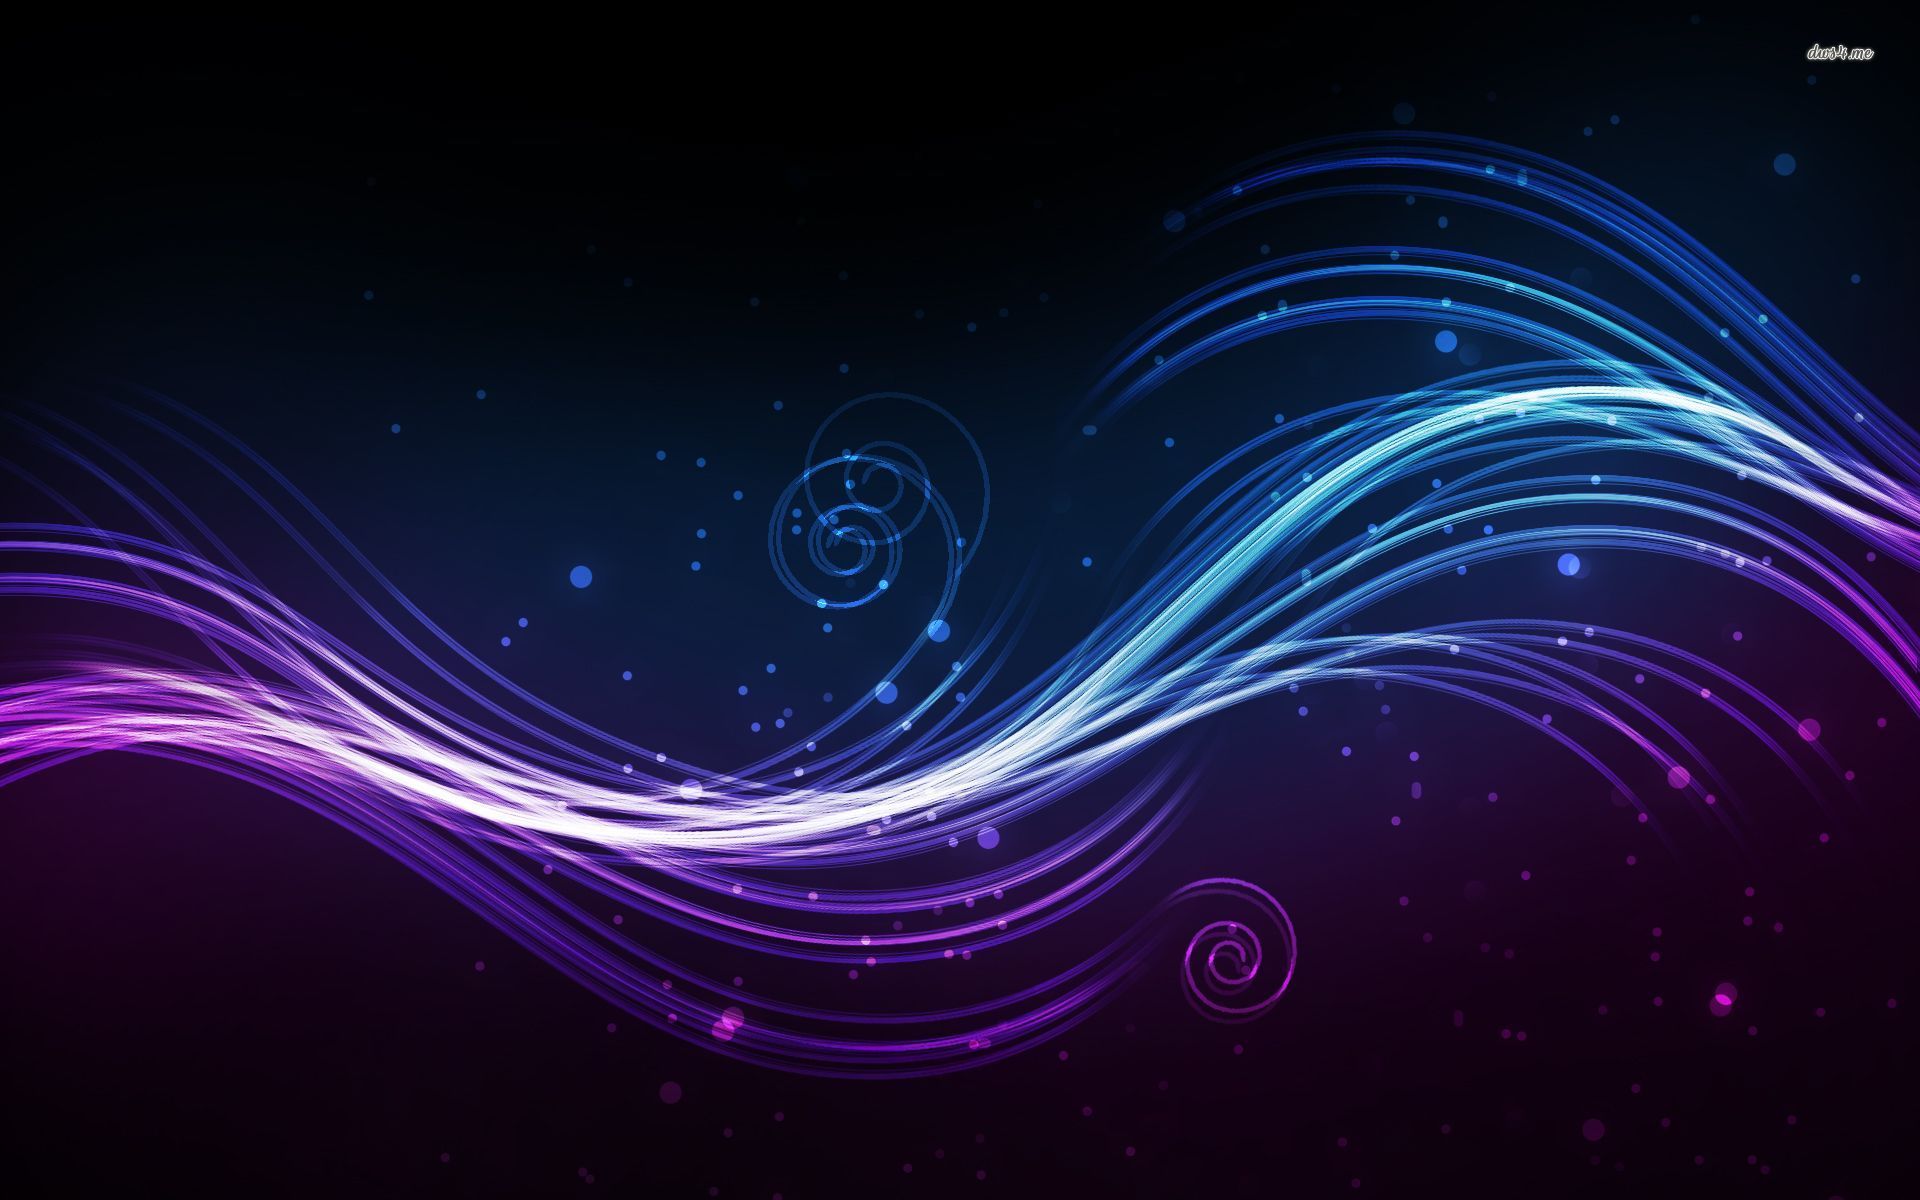 Purple Waves, Swirls and Circles wallpaper - Abstract wallpapers - #5244